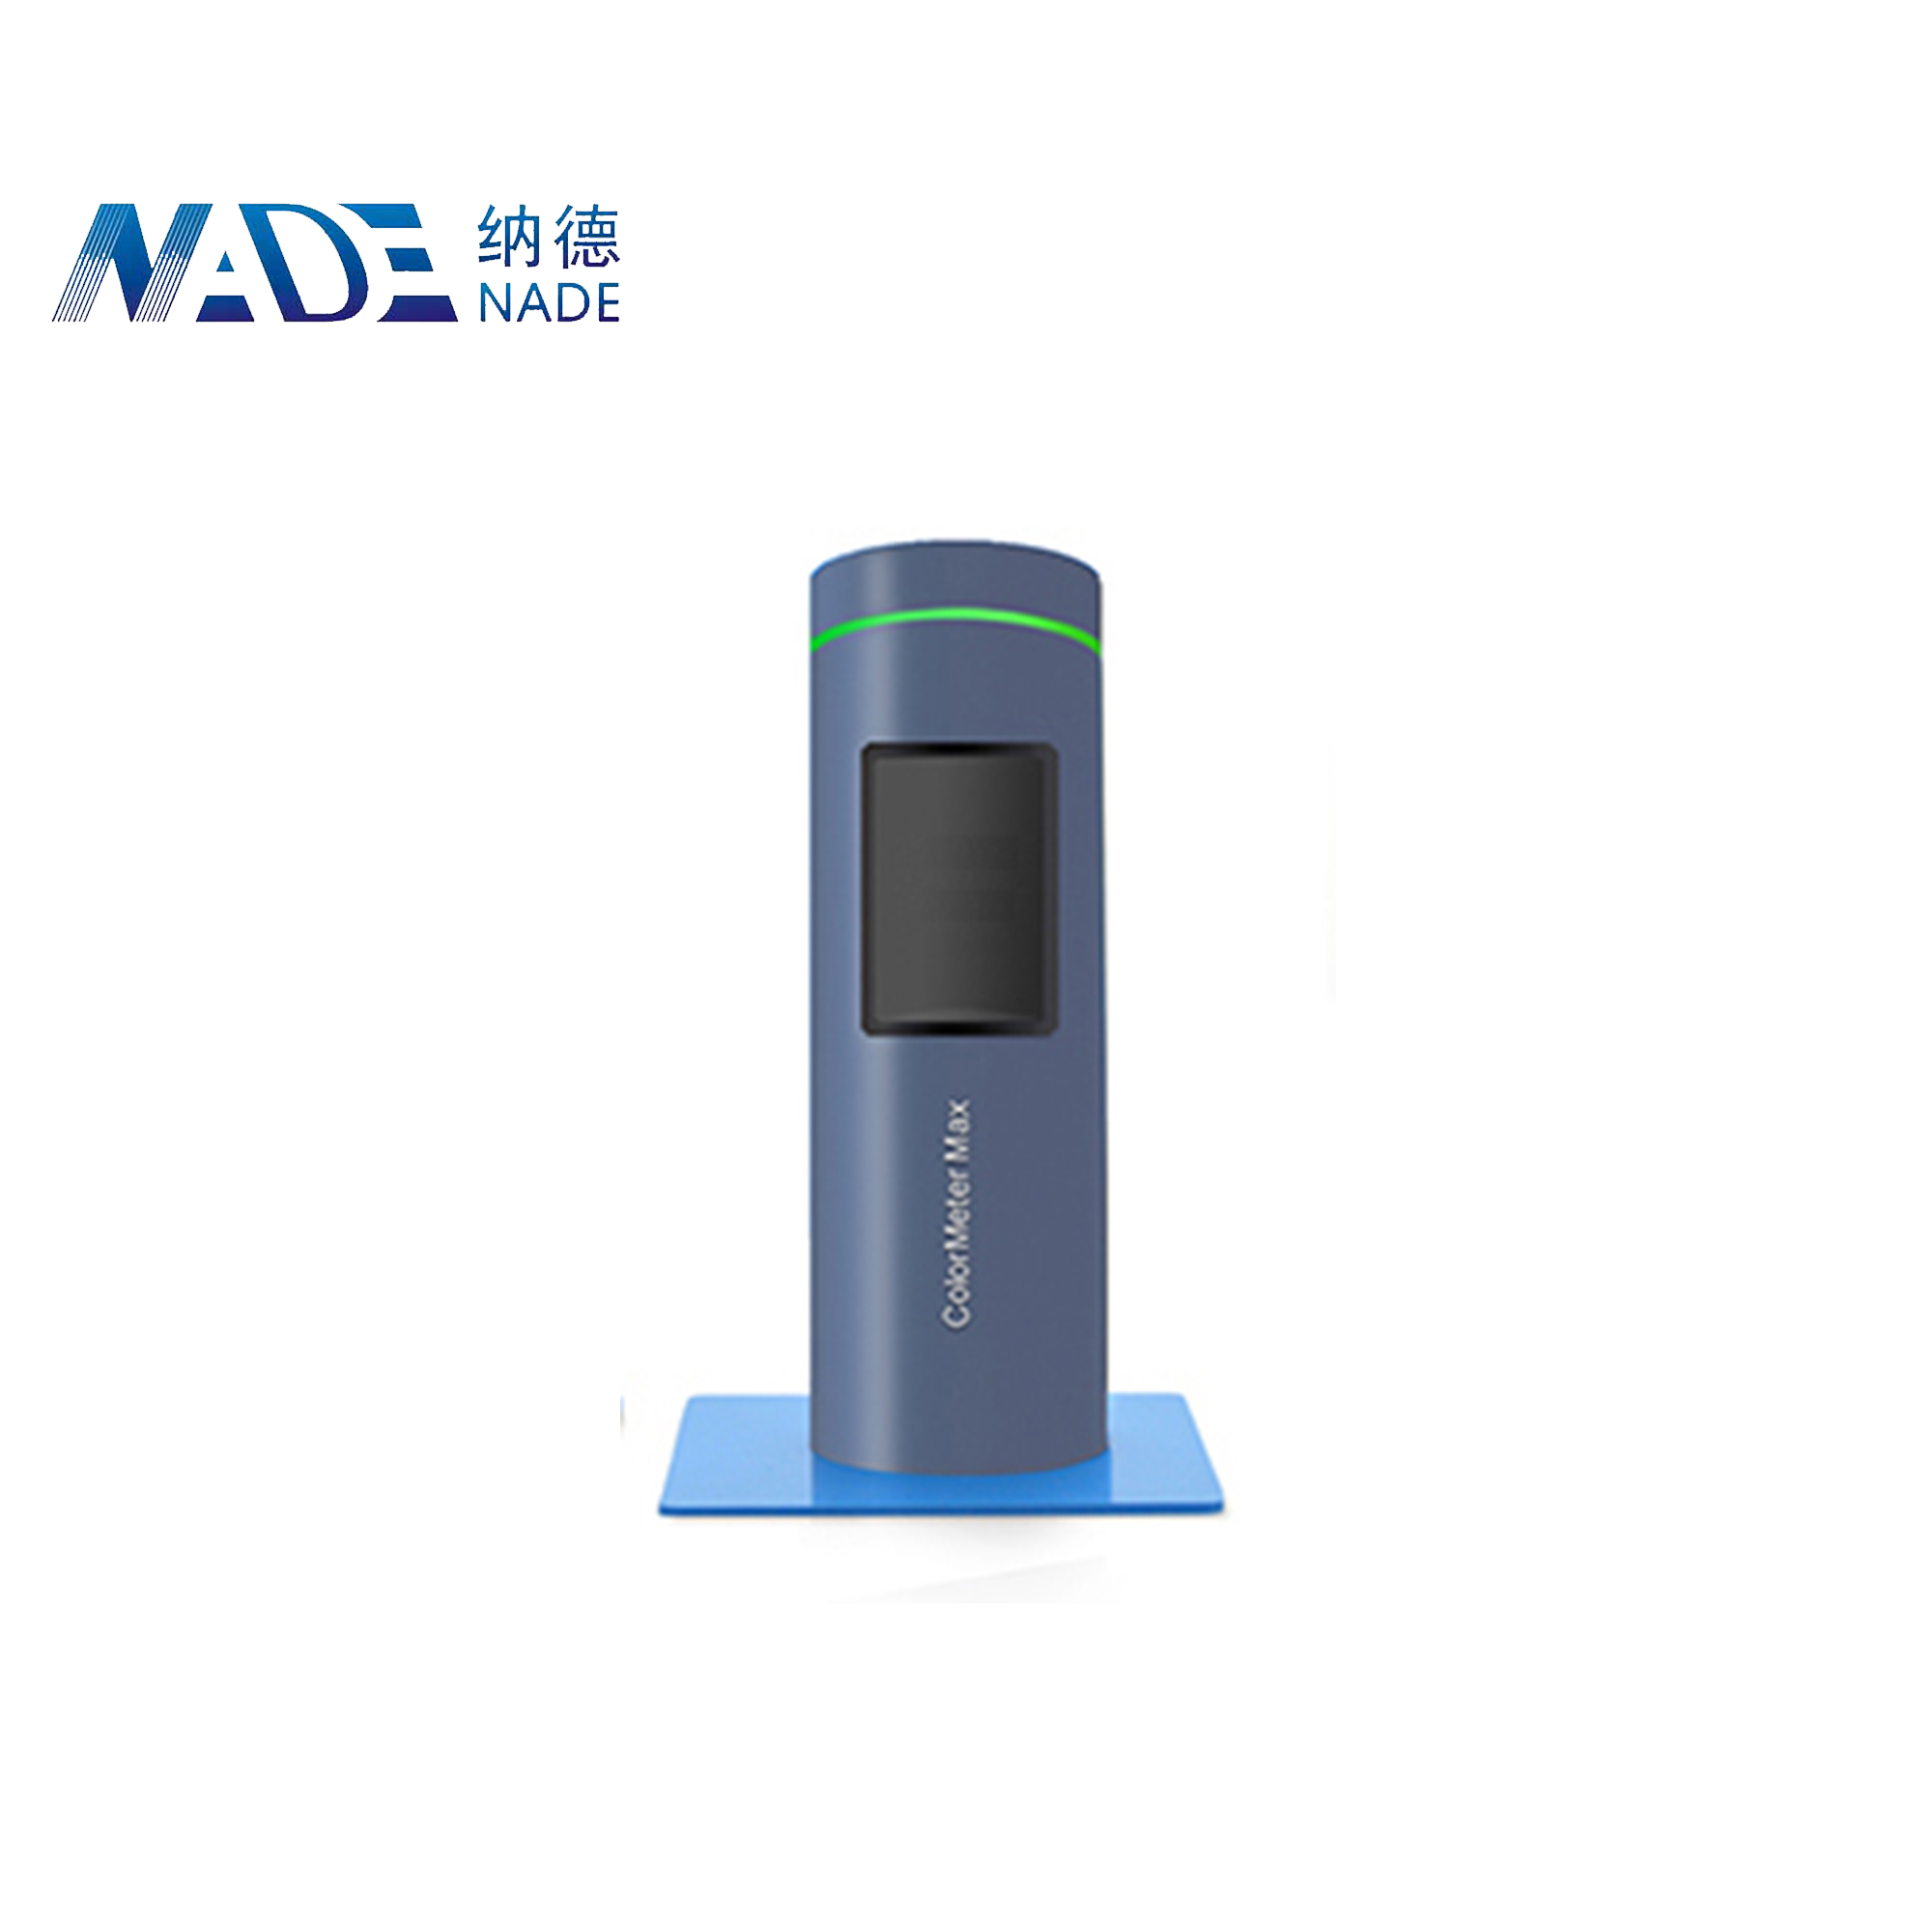 NADE New enhanced version High precision ColorMeter MAX Low Price Digital Portable Colorimeter can connect to mobile APP